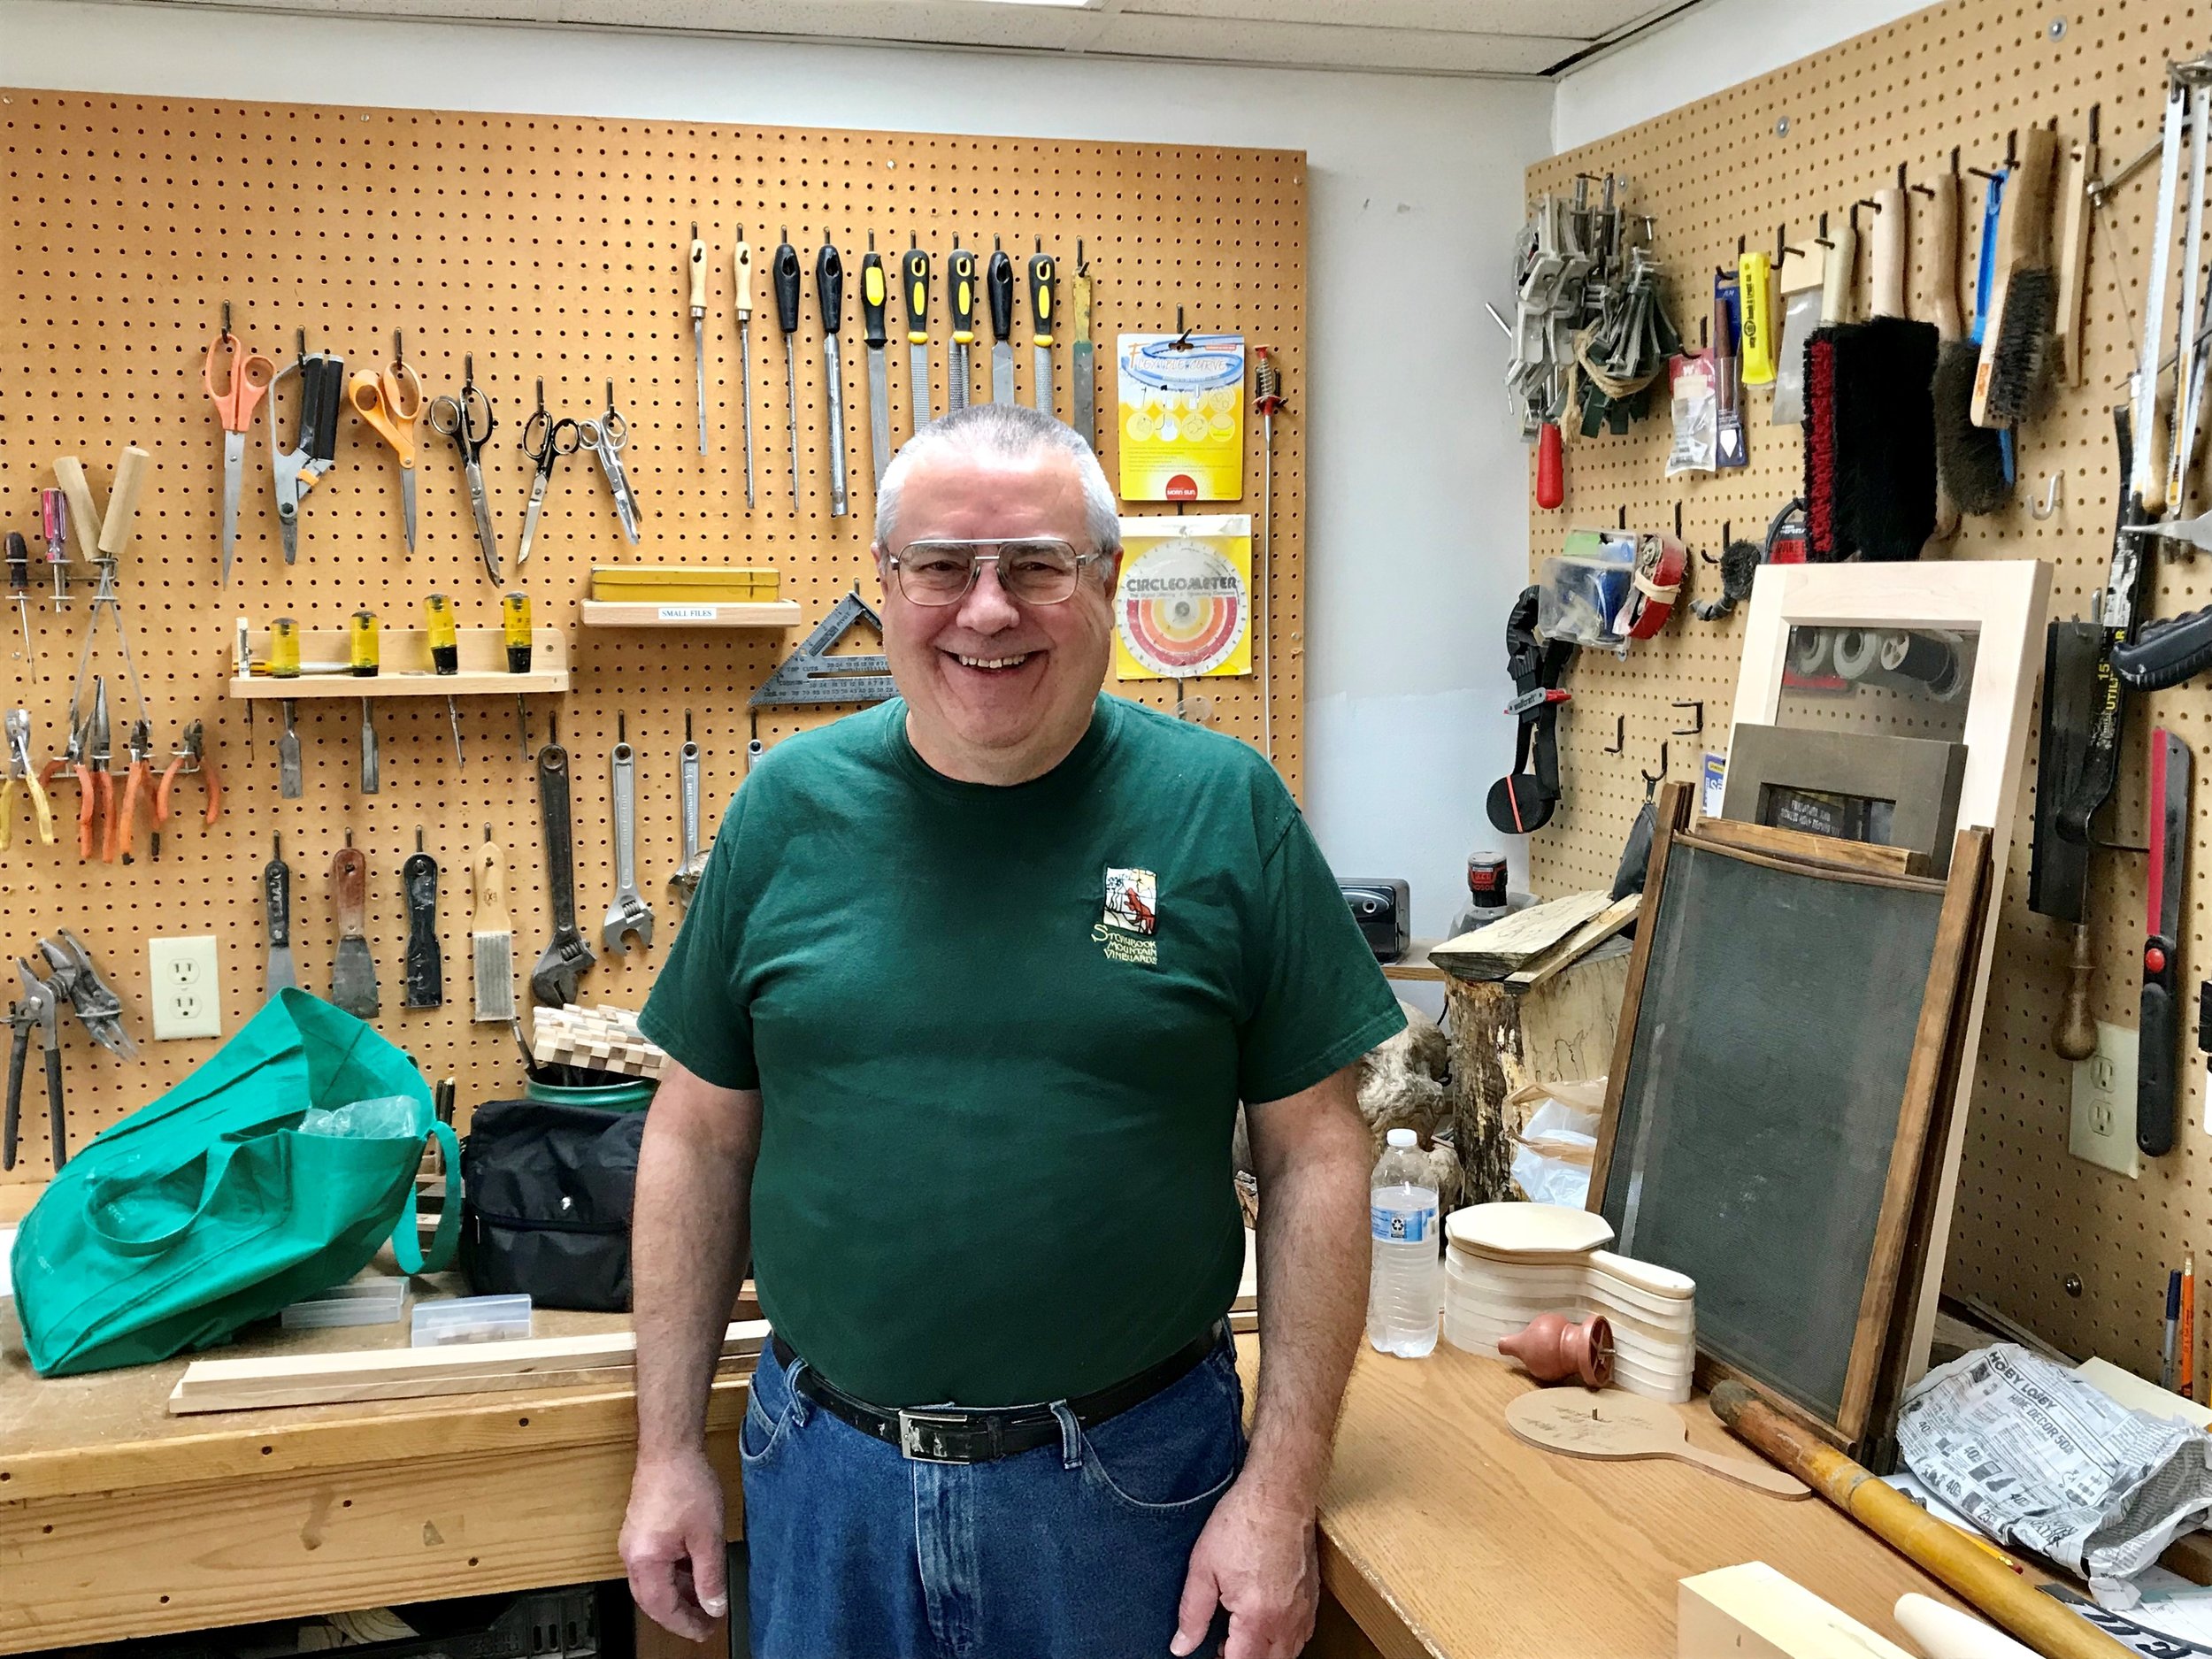  “I volunteer because I like woodworking and helping people.”  -Mike 